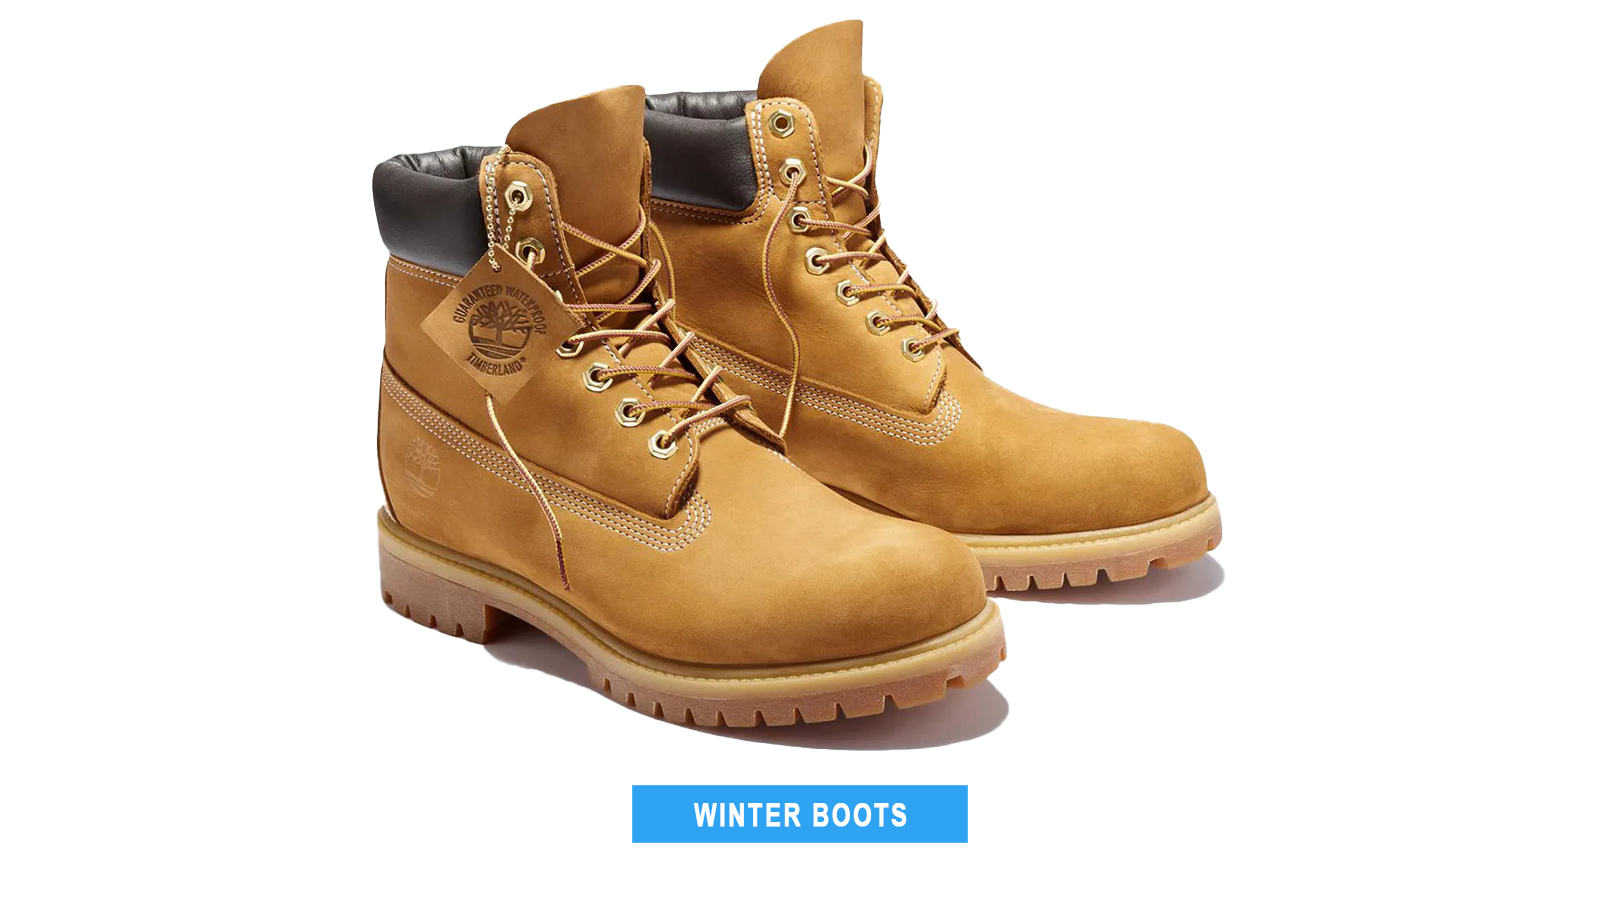 hiking/winter boots style for men